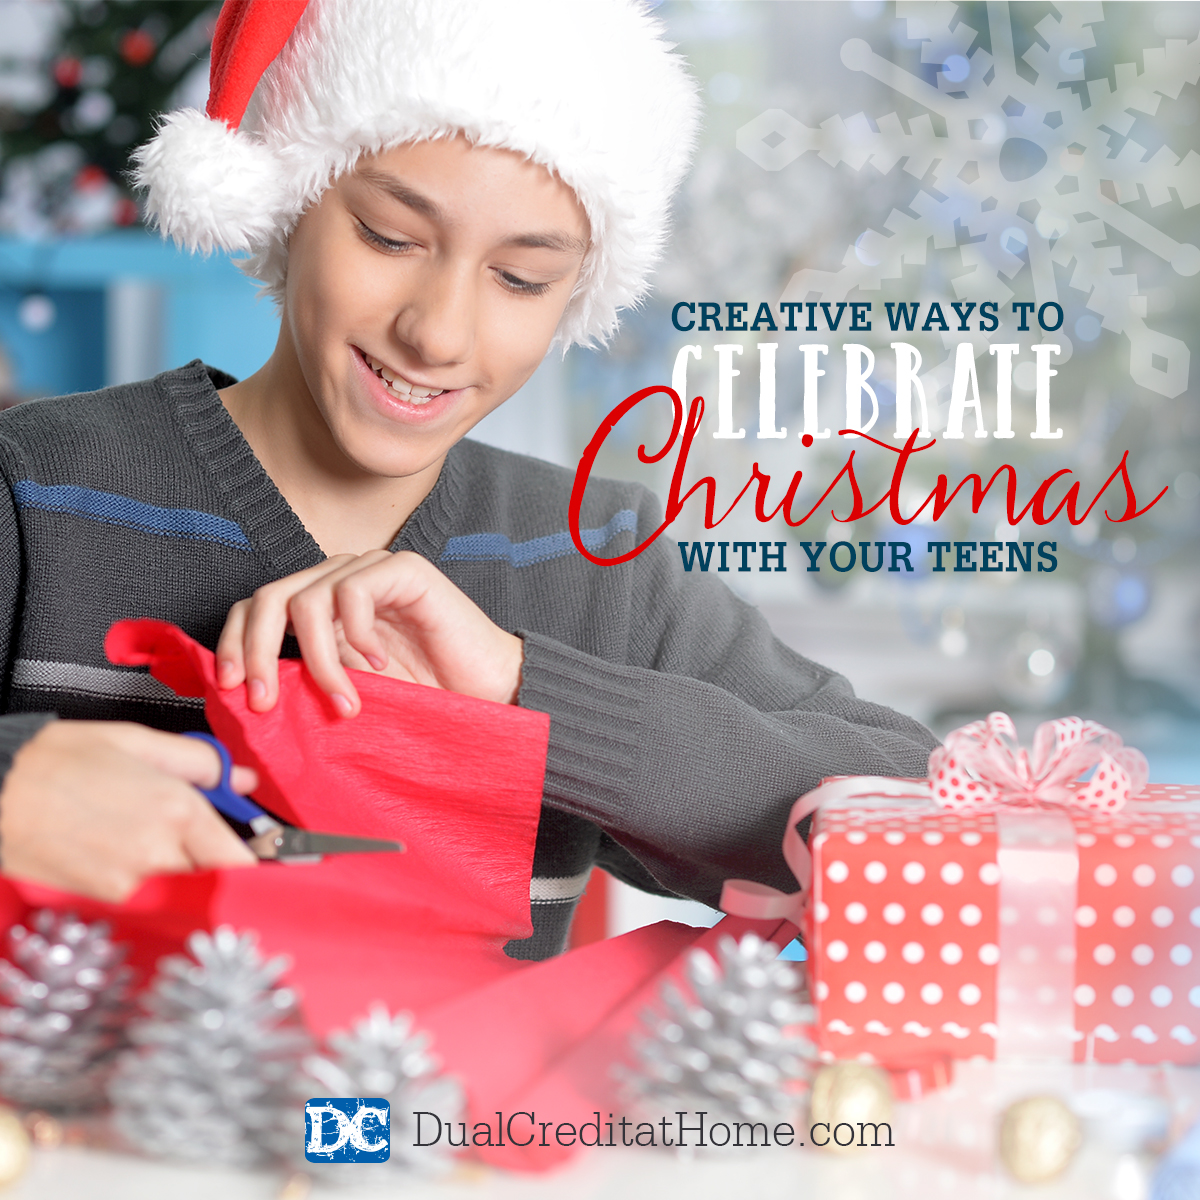 Creative Ways to Celebrate Christmas with Your Teens